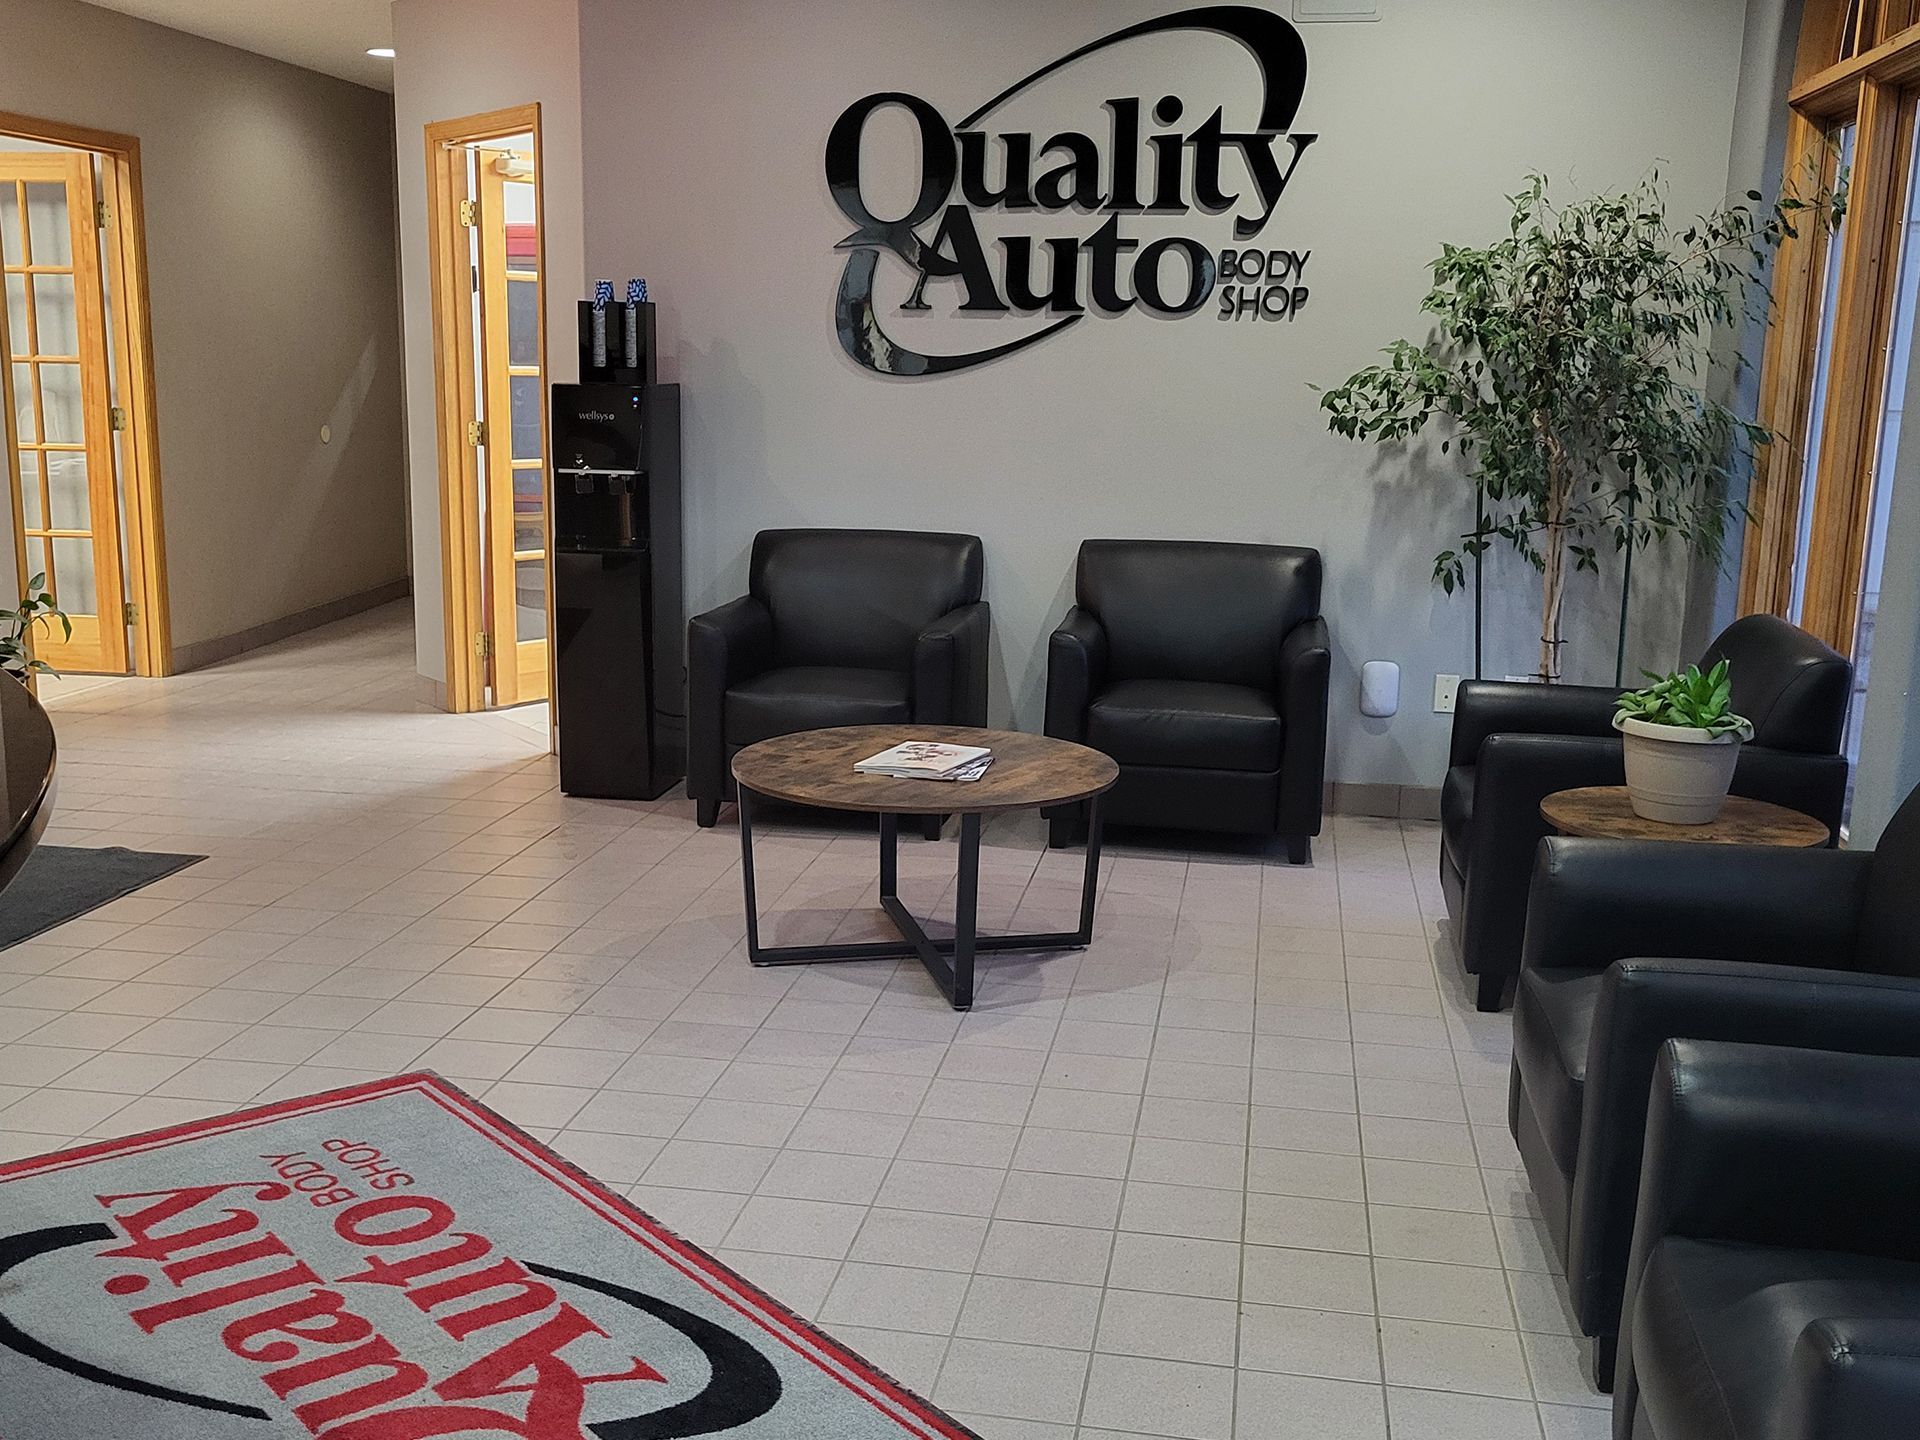 A waiting room with chairs and a sign that says quality auto